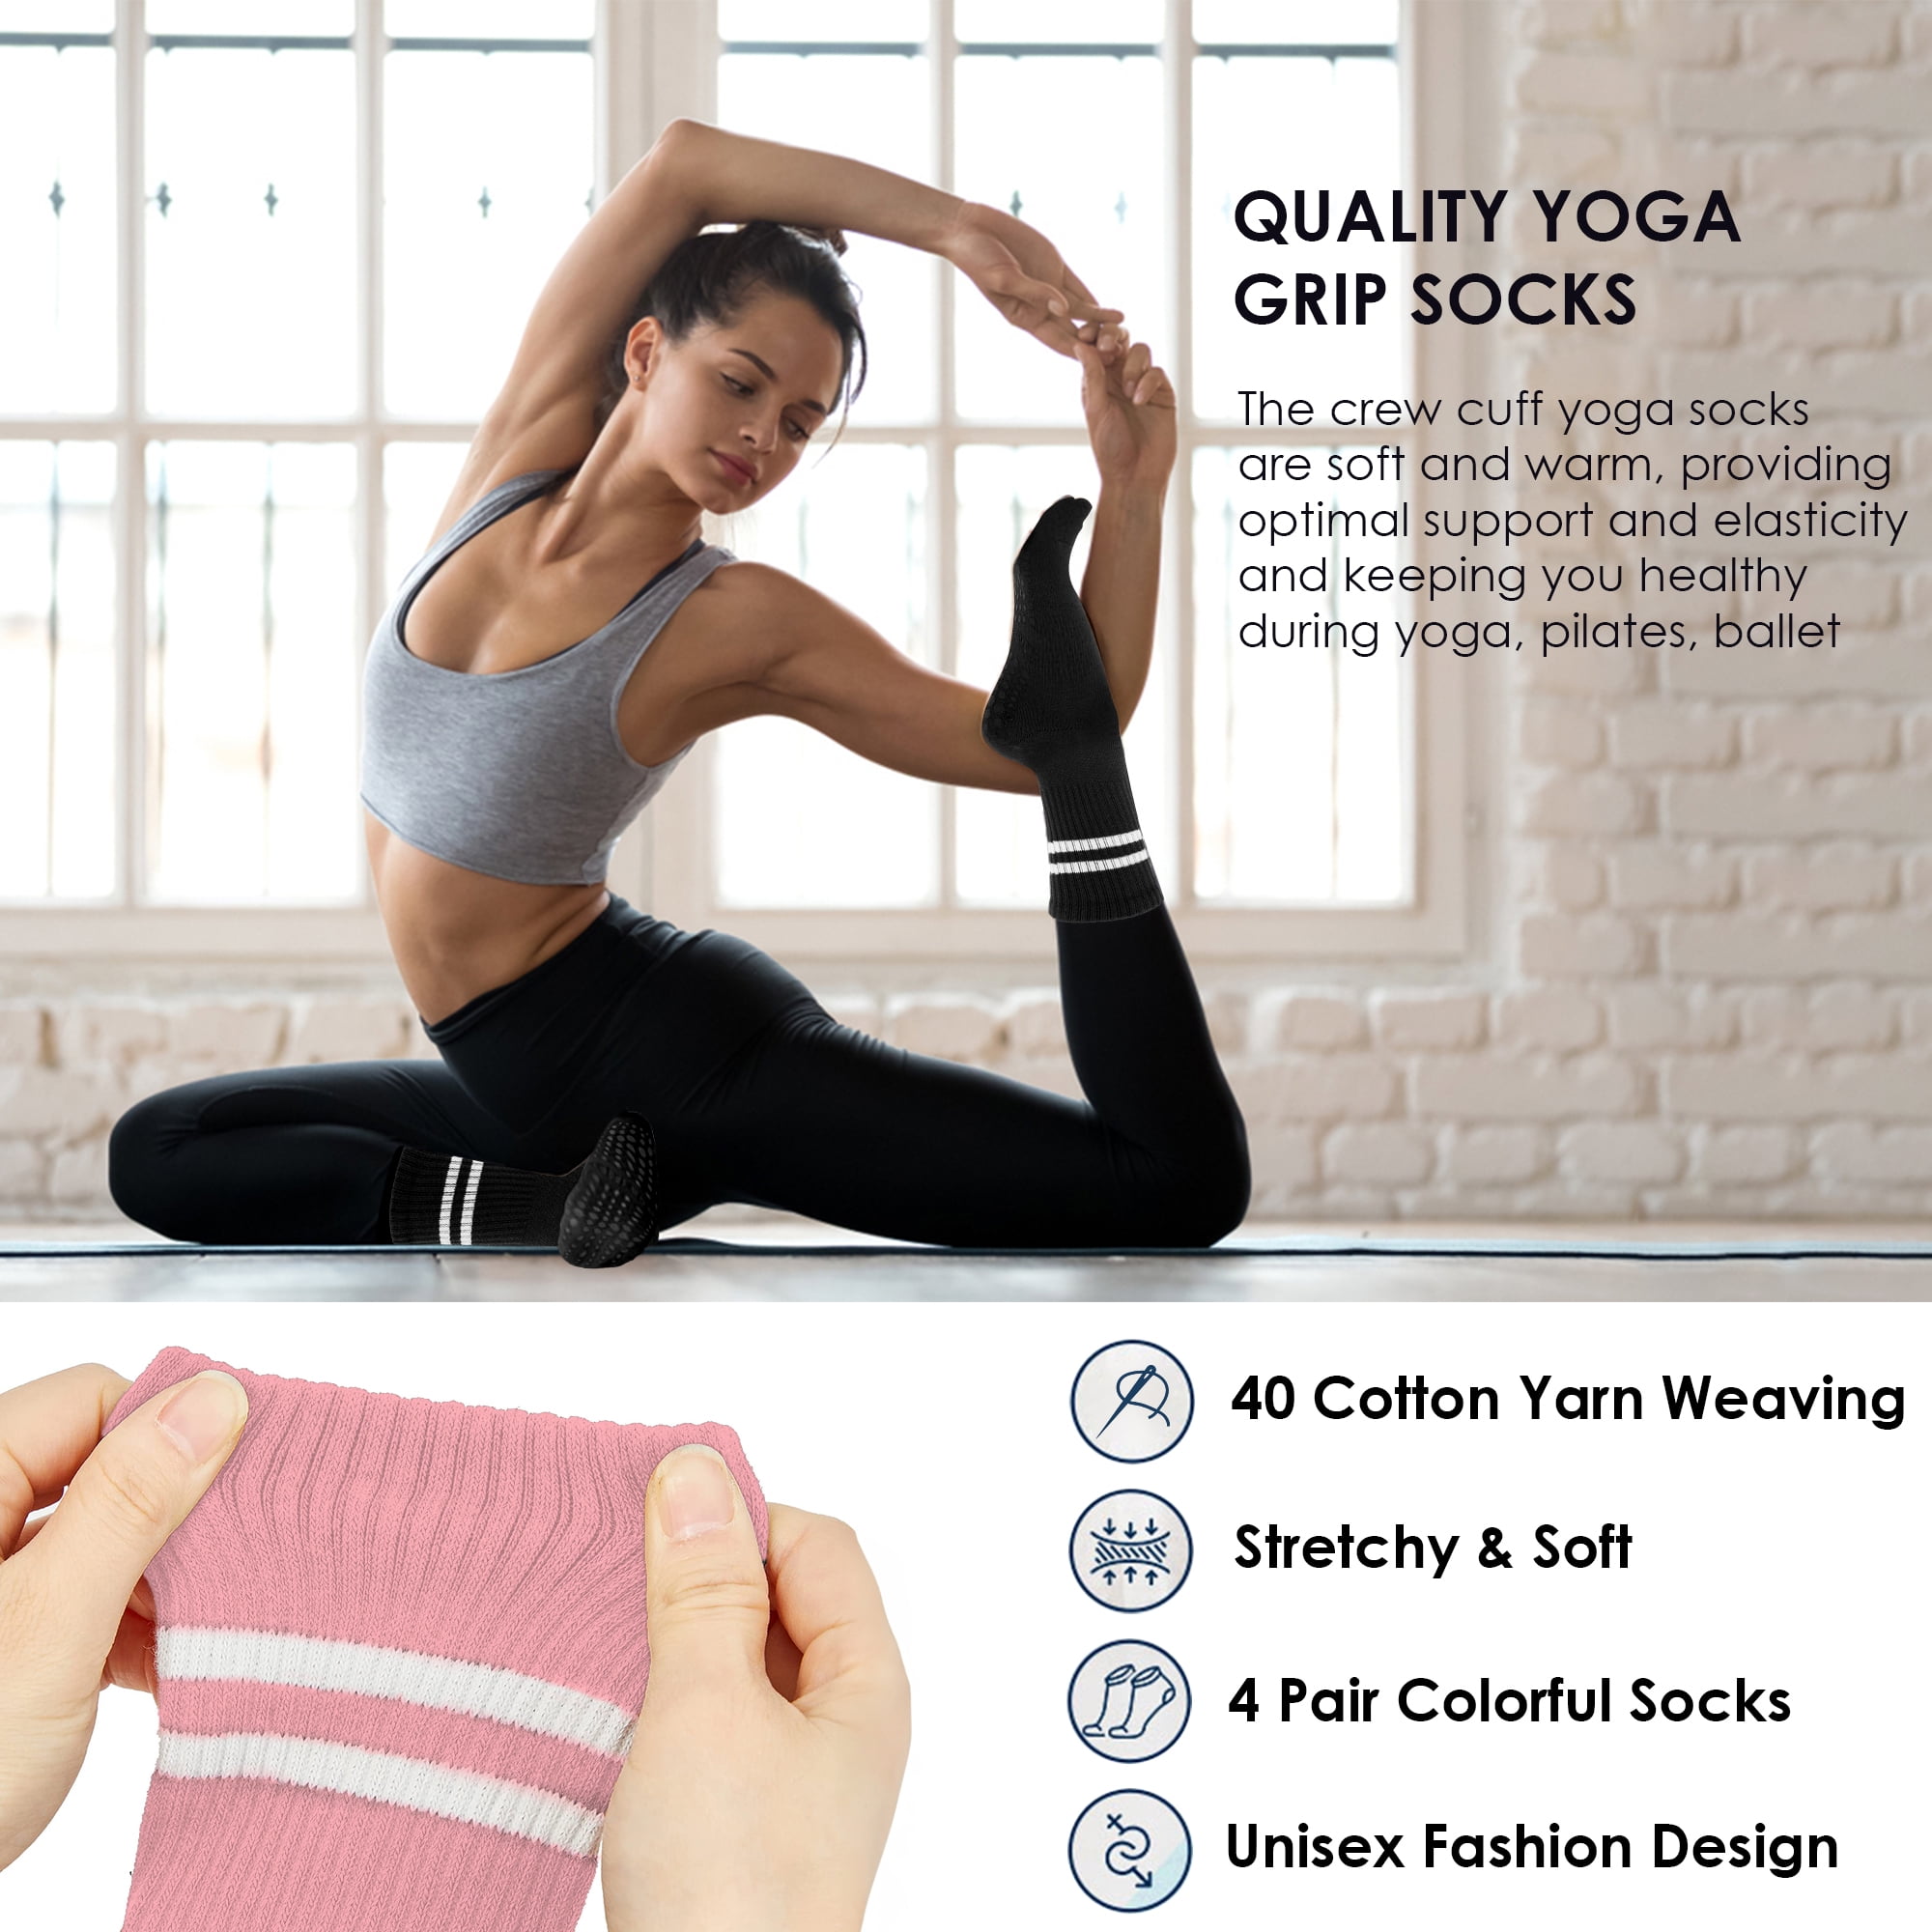 Can You Practice Pilates & Yoga In Compression Socks?